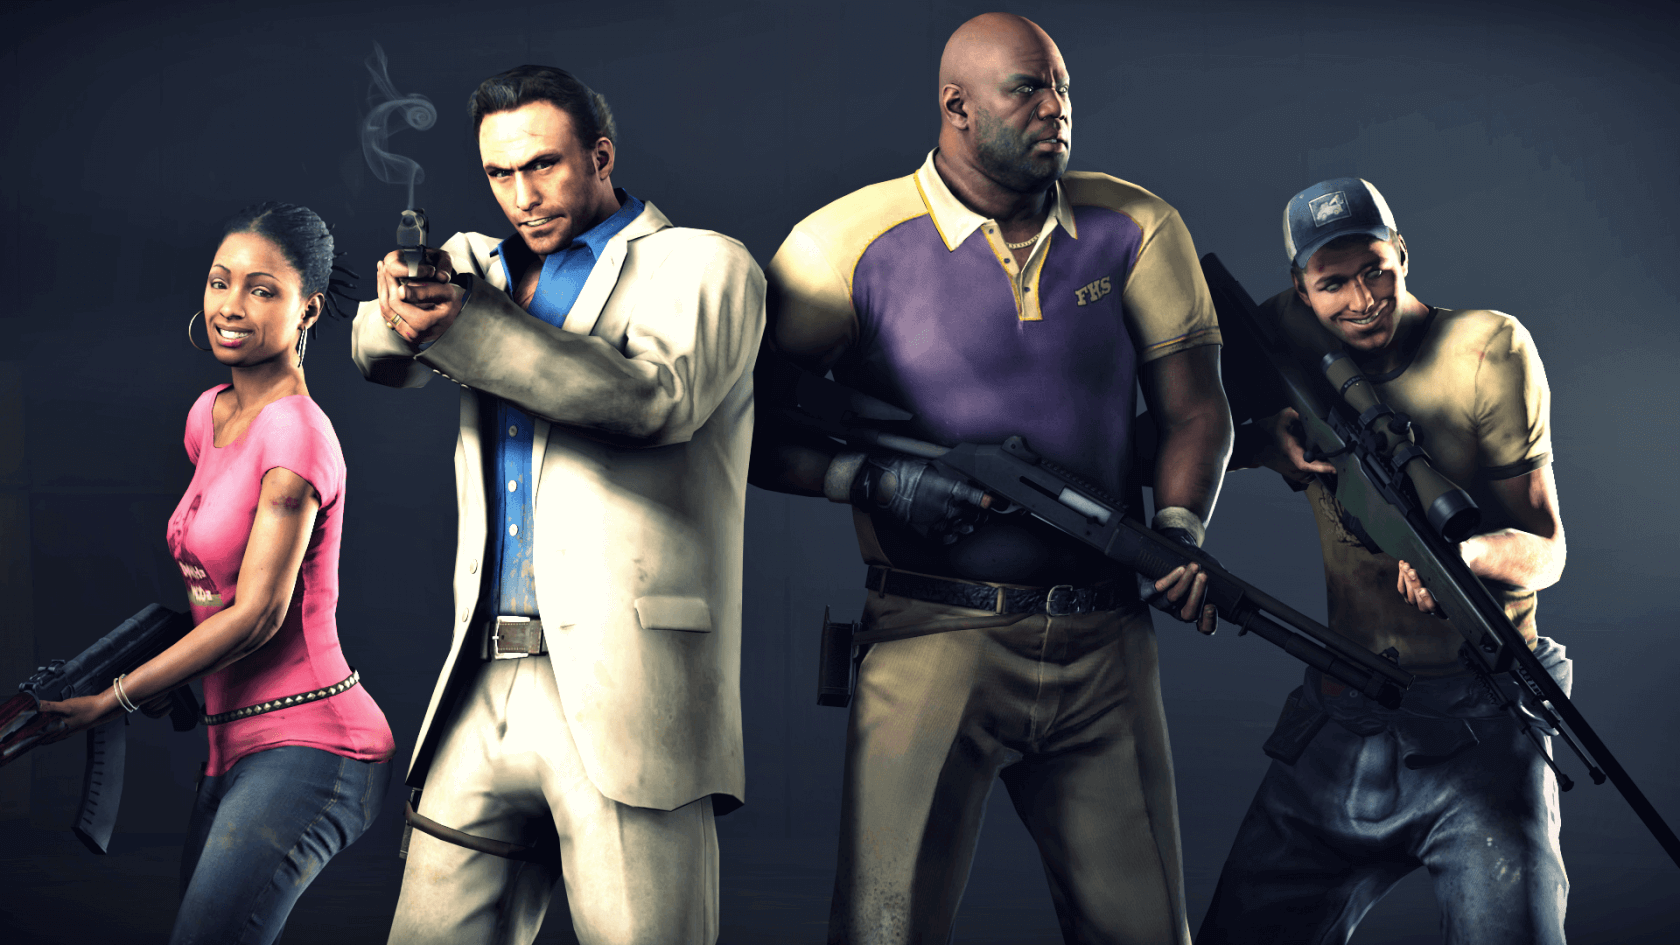 Valve confirms Left for Dead 3 is not in development